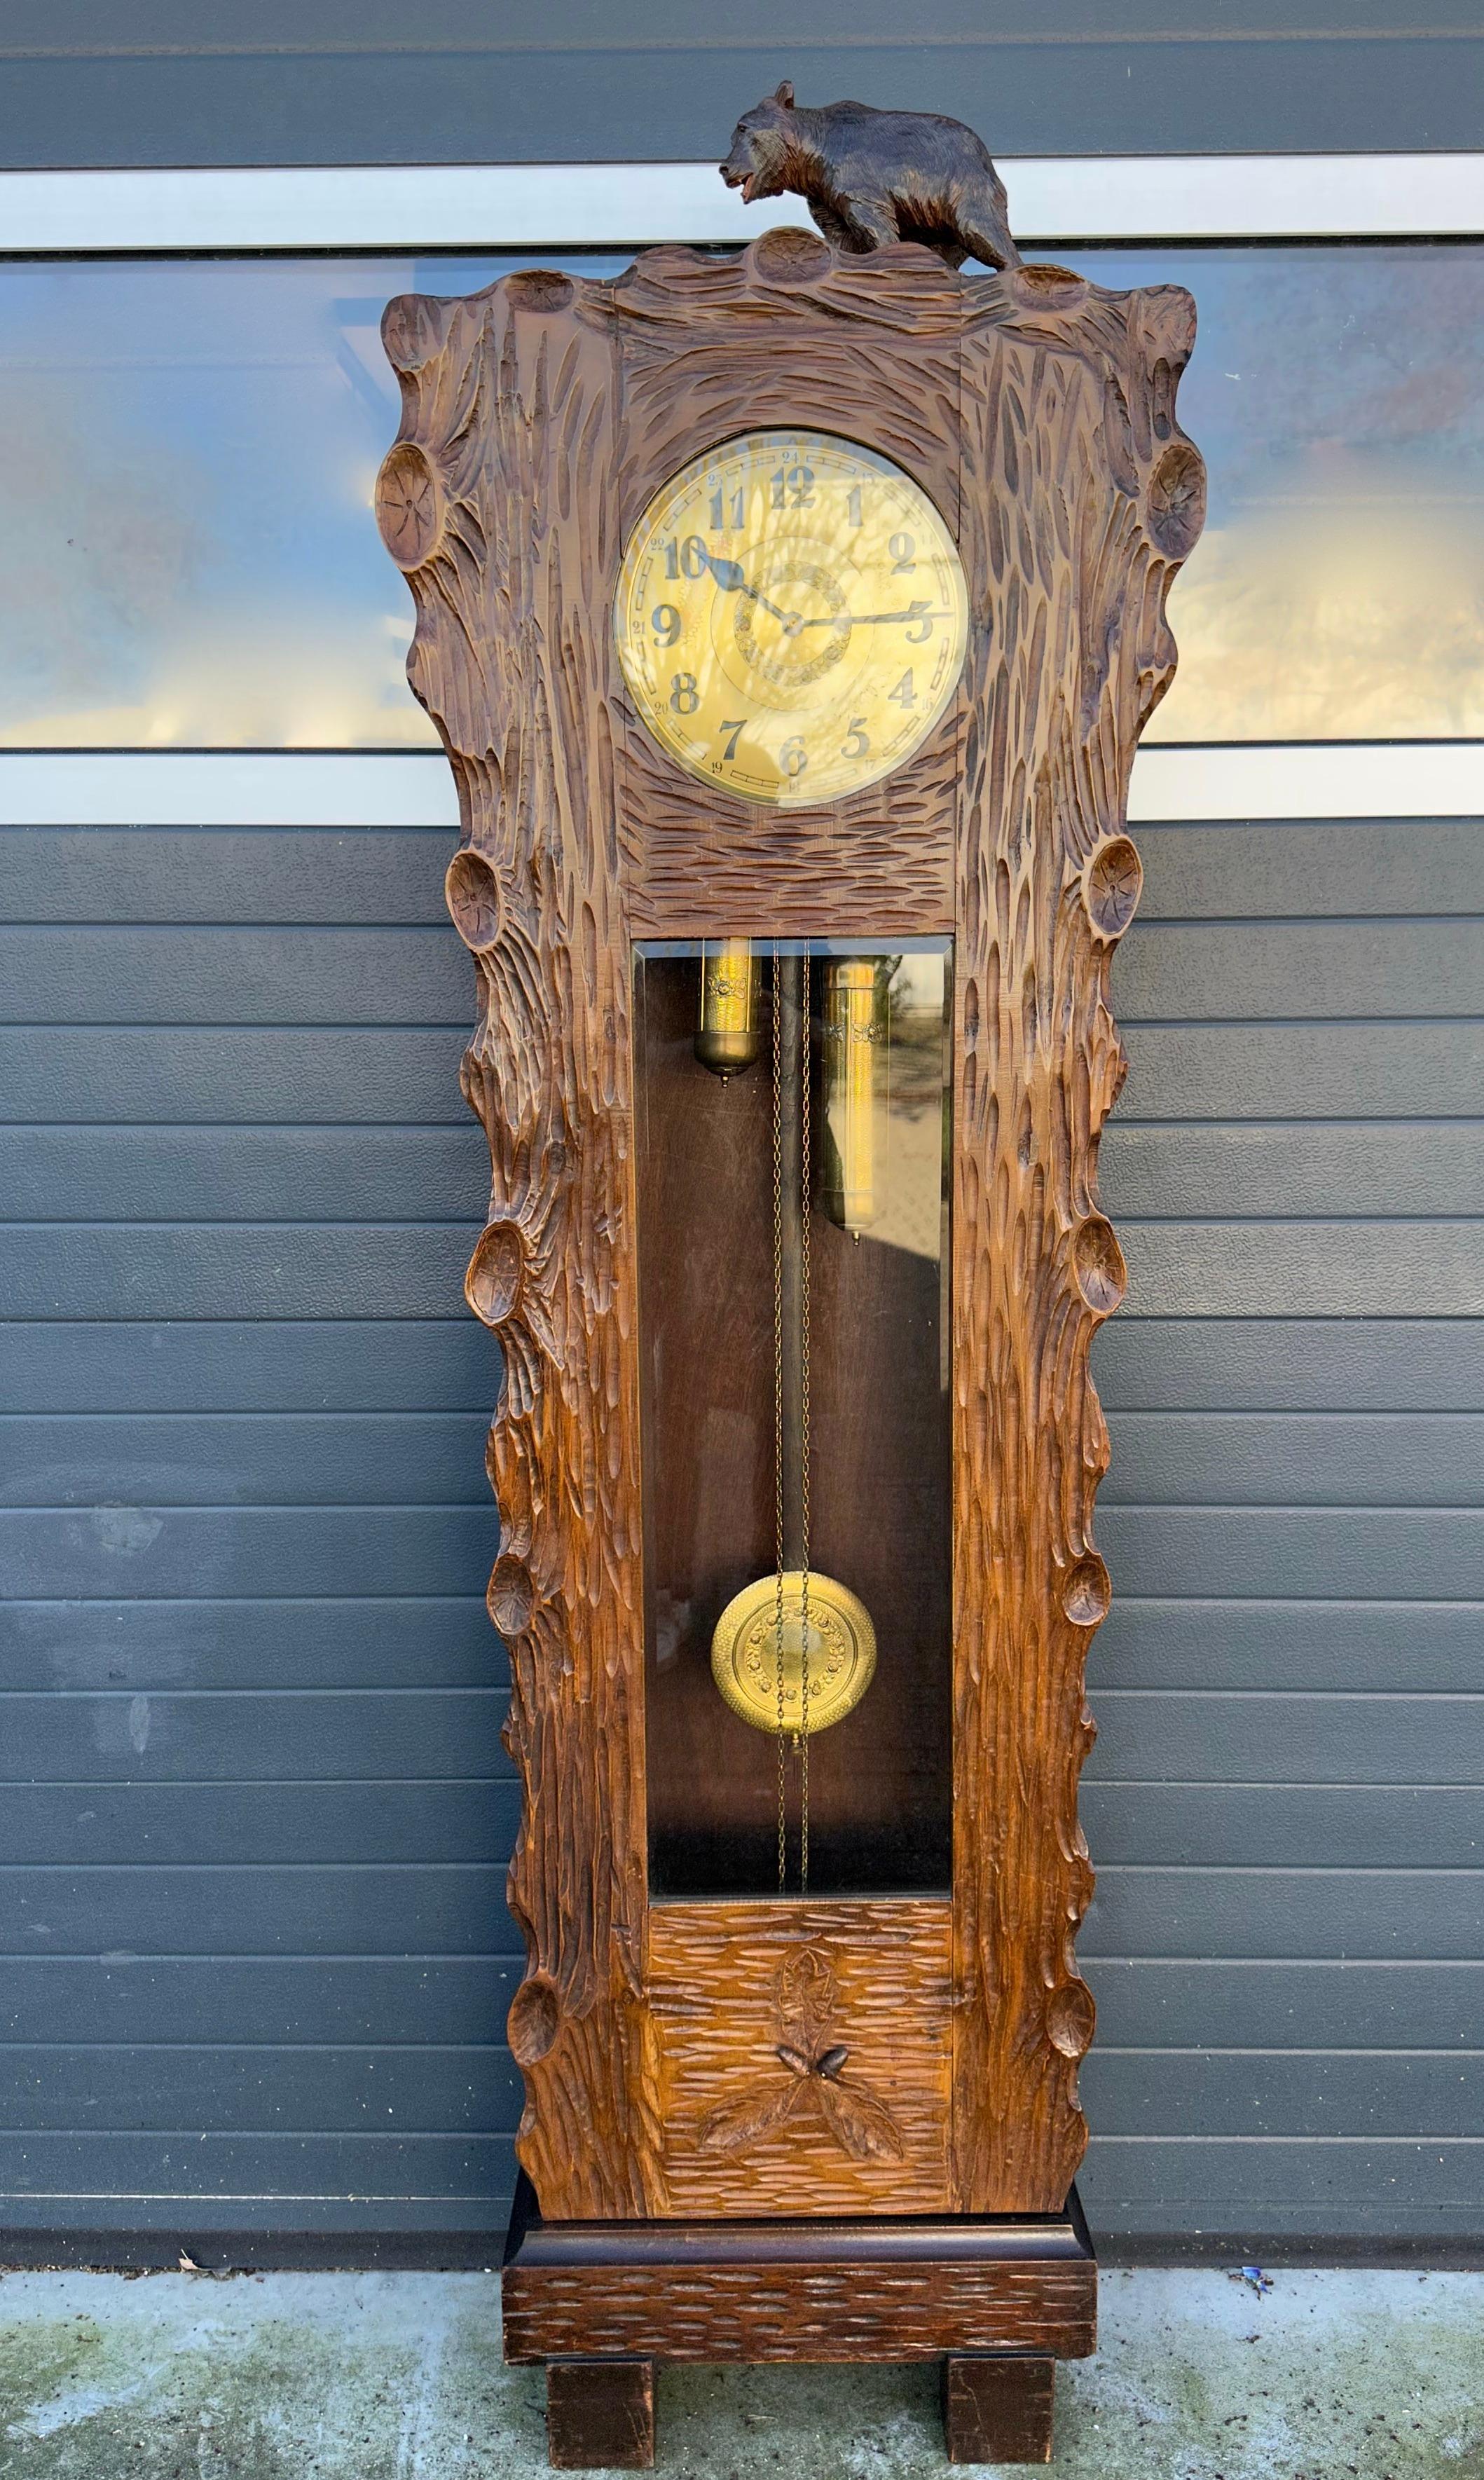 Stunning clock for the collectors of very rare and truly stylish Black Forest antiques.

Tree trunk design longcase or grandfather clocks are a rare find and this 6.5 feet tall specimen could hardly be in better condition. All handcrafted and hand